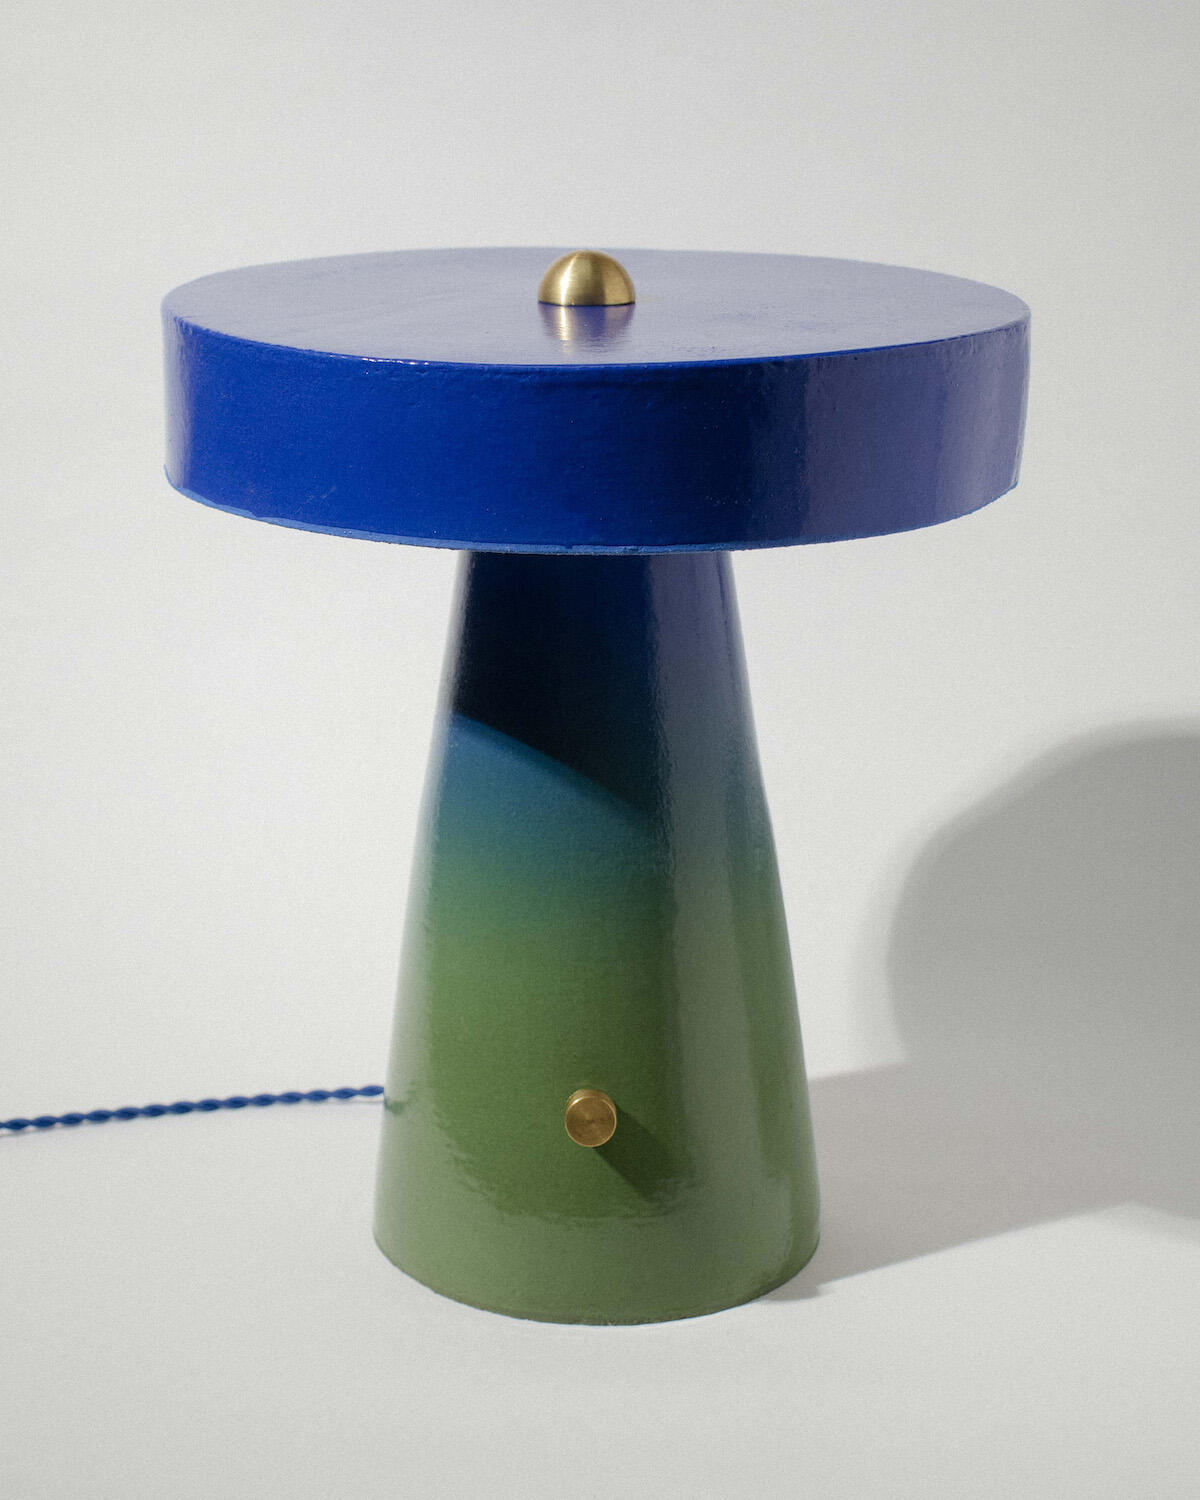 The Gradient table lamp in Horizon from Steicher Goods